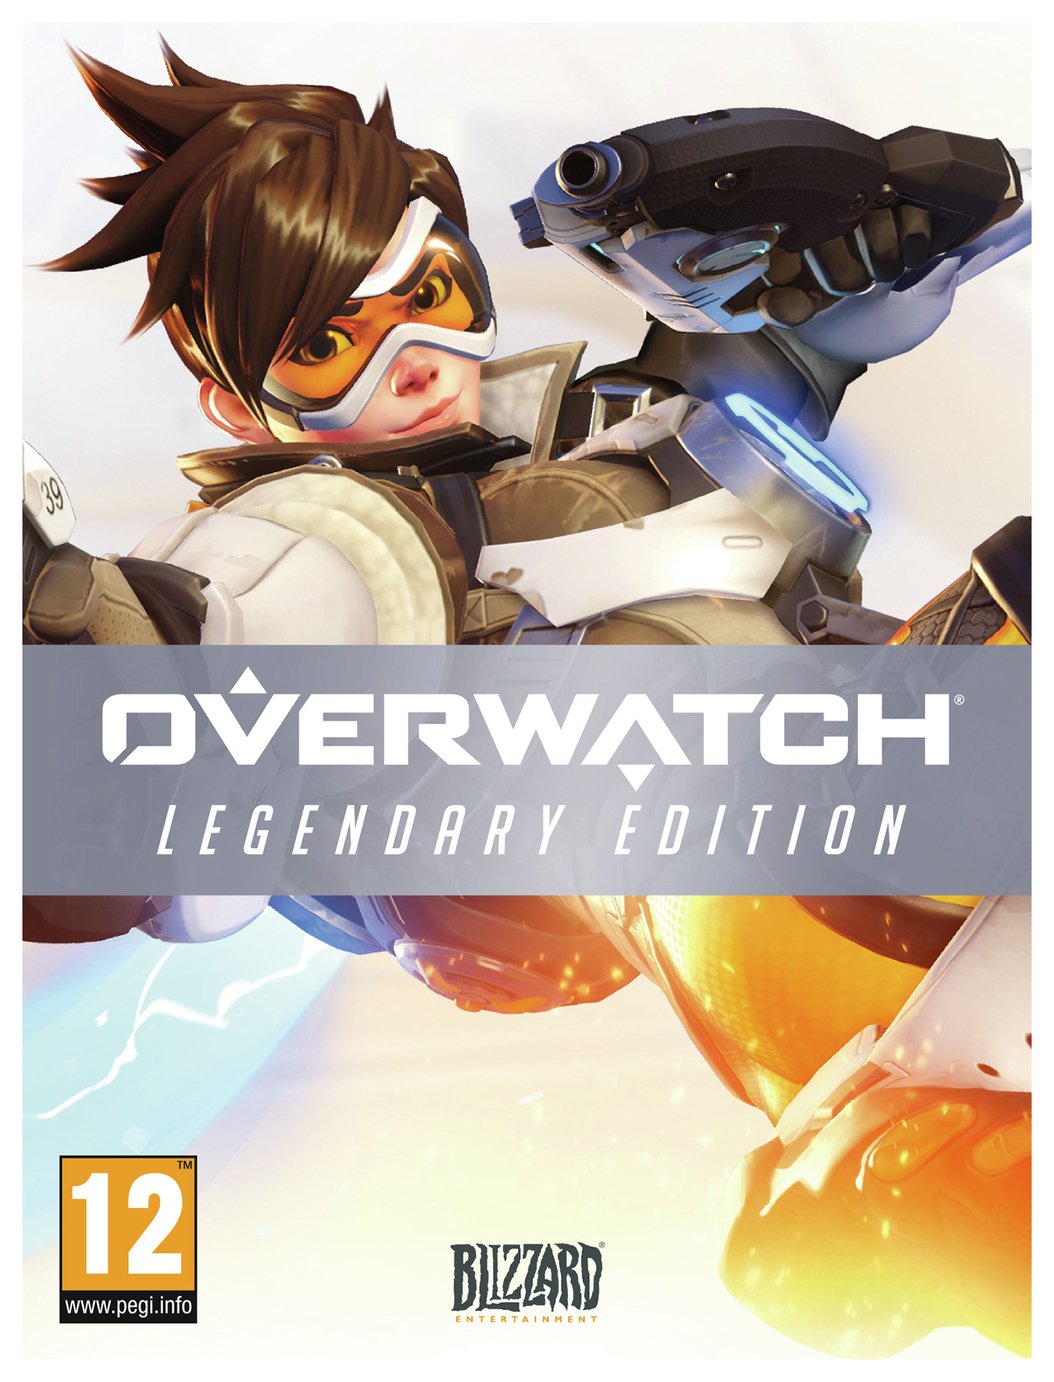 Overwatch Legendary Edition PC Game review